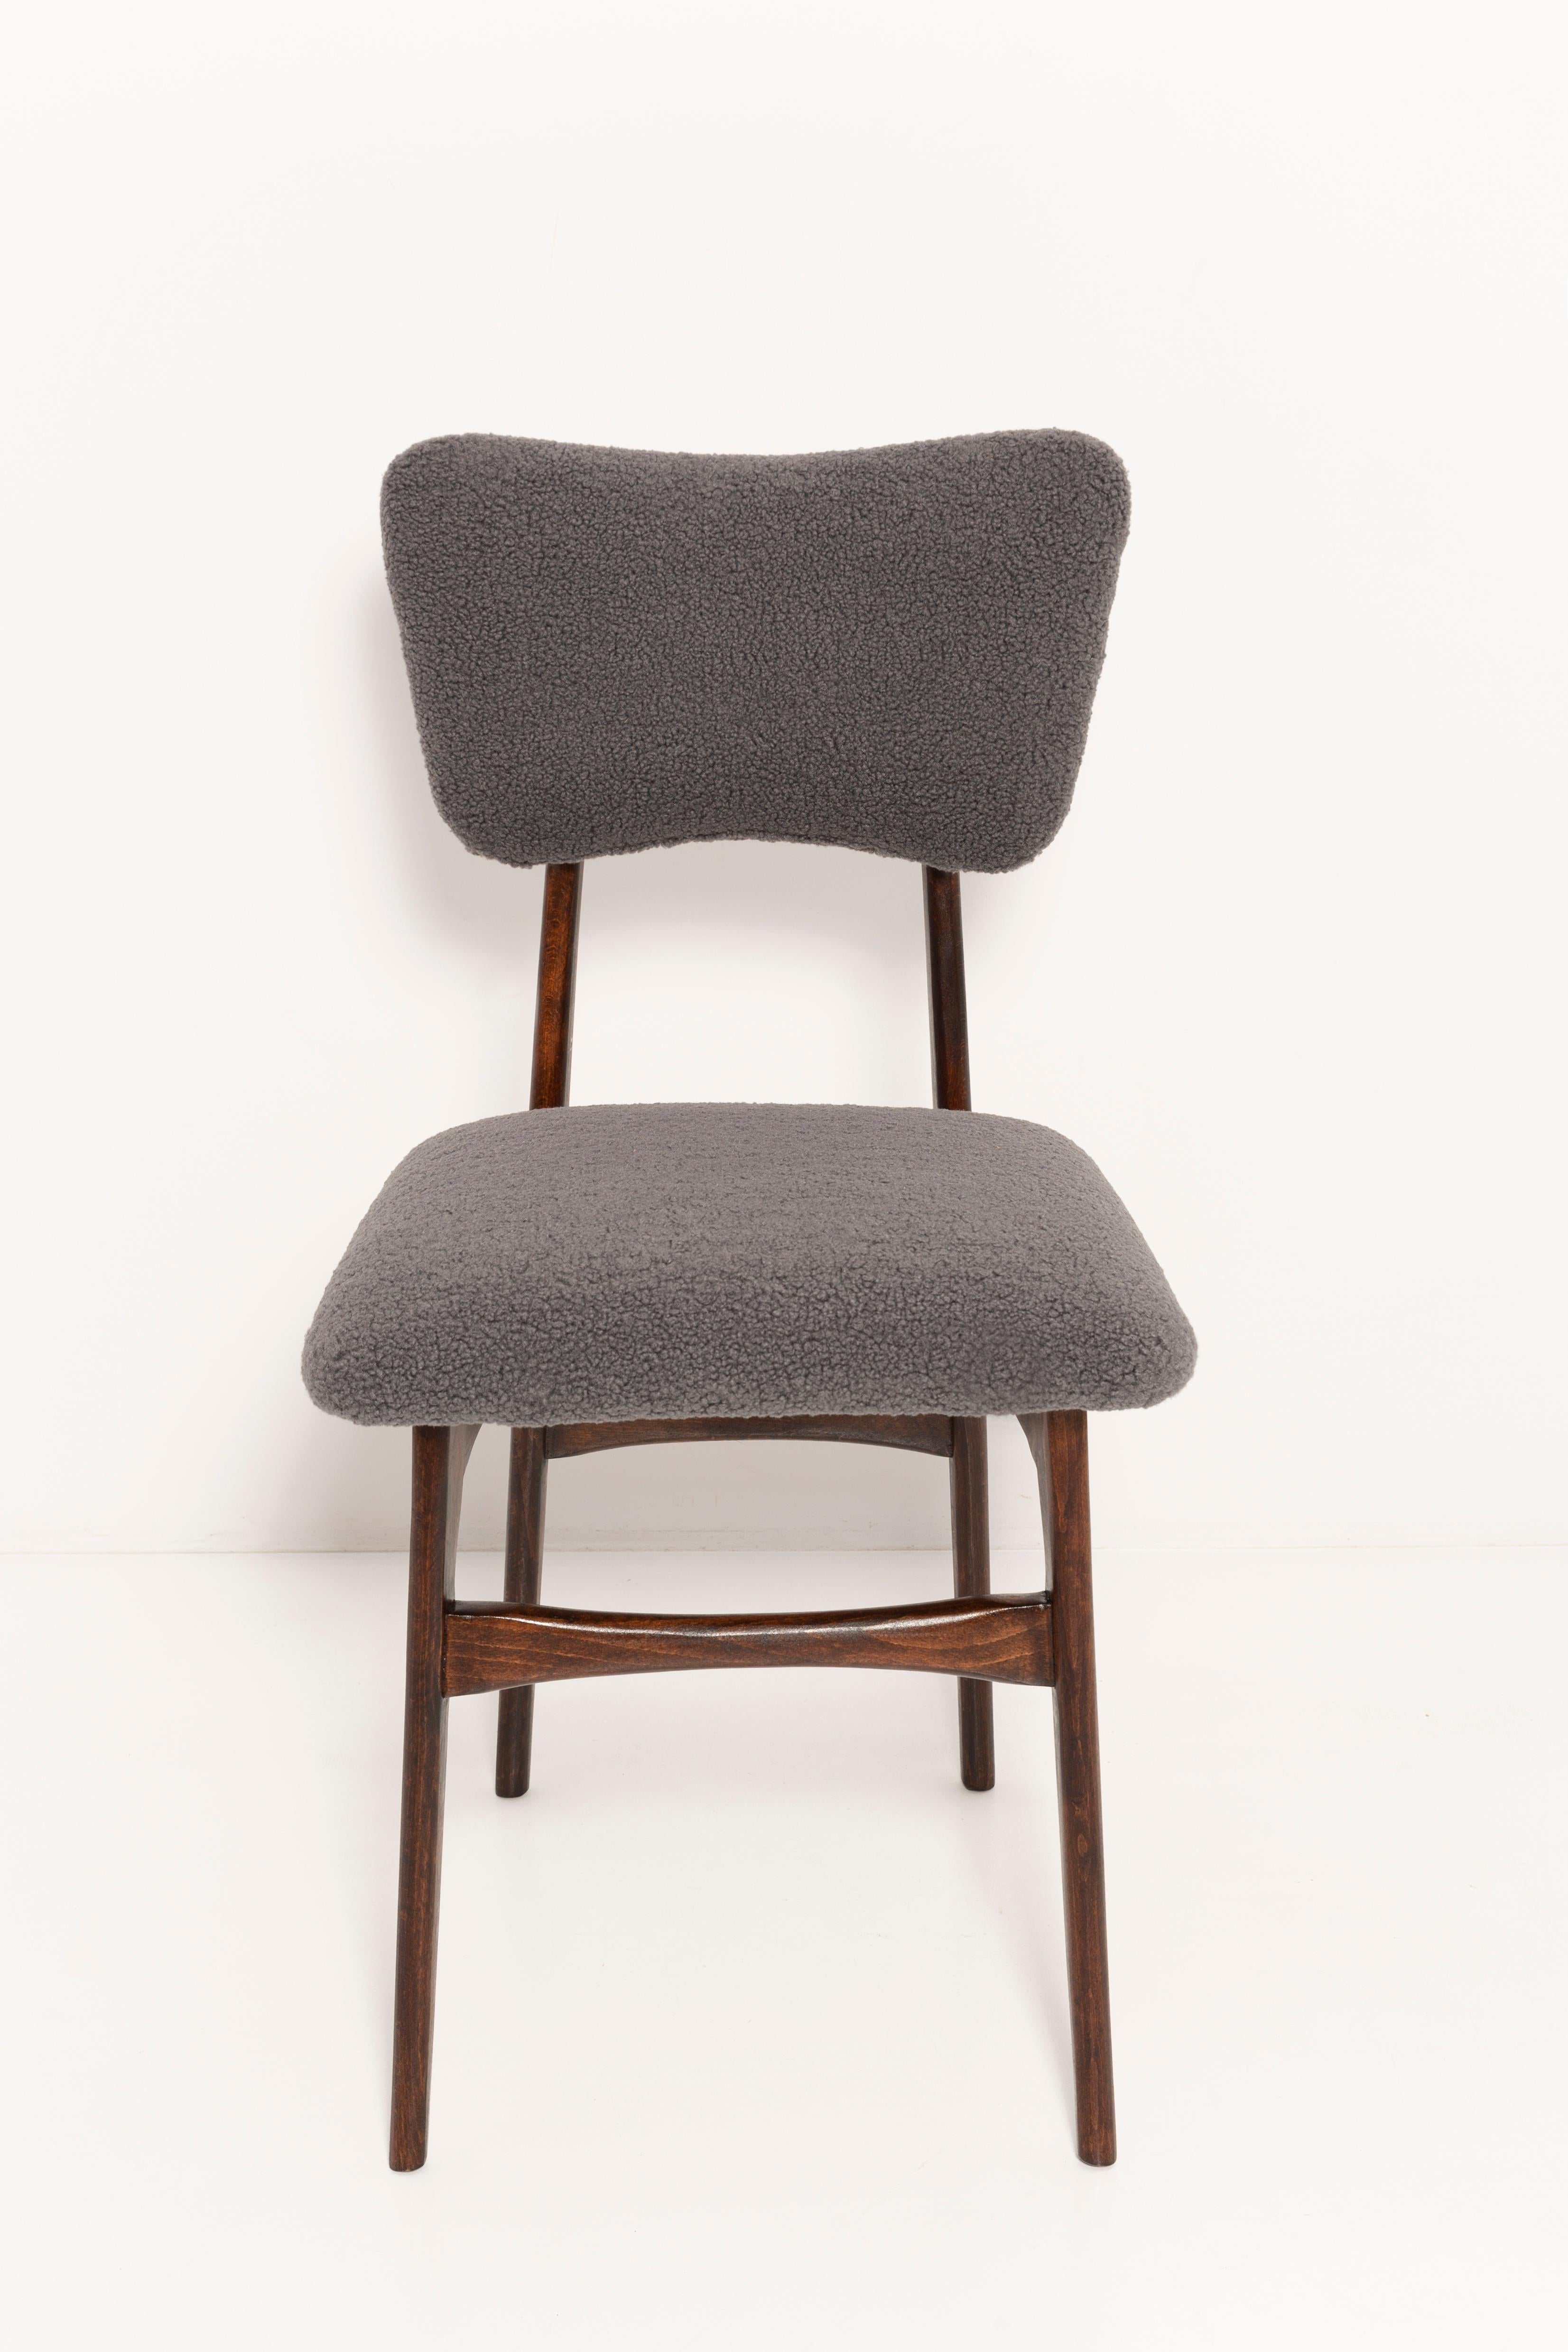 Set of Two 20th Century Chairs in Dark Boucle, Europe, 1960s For Sale 5